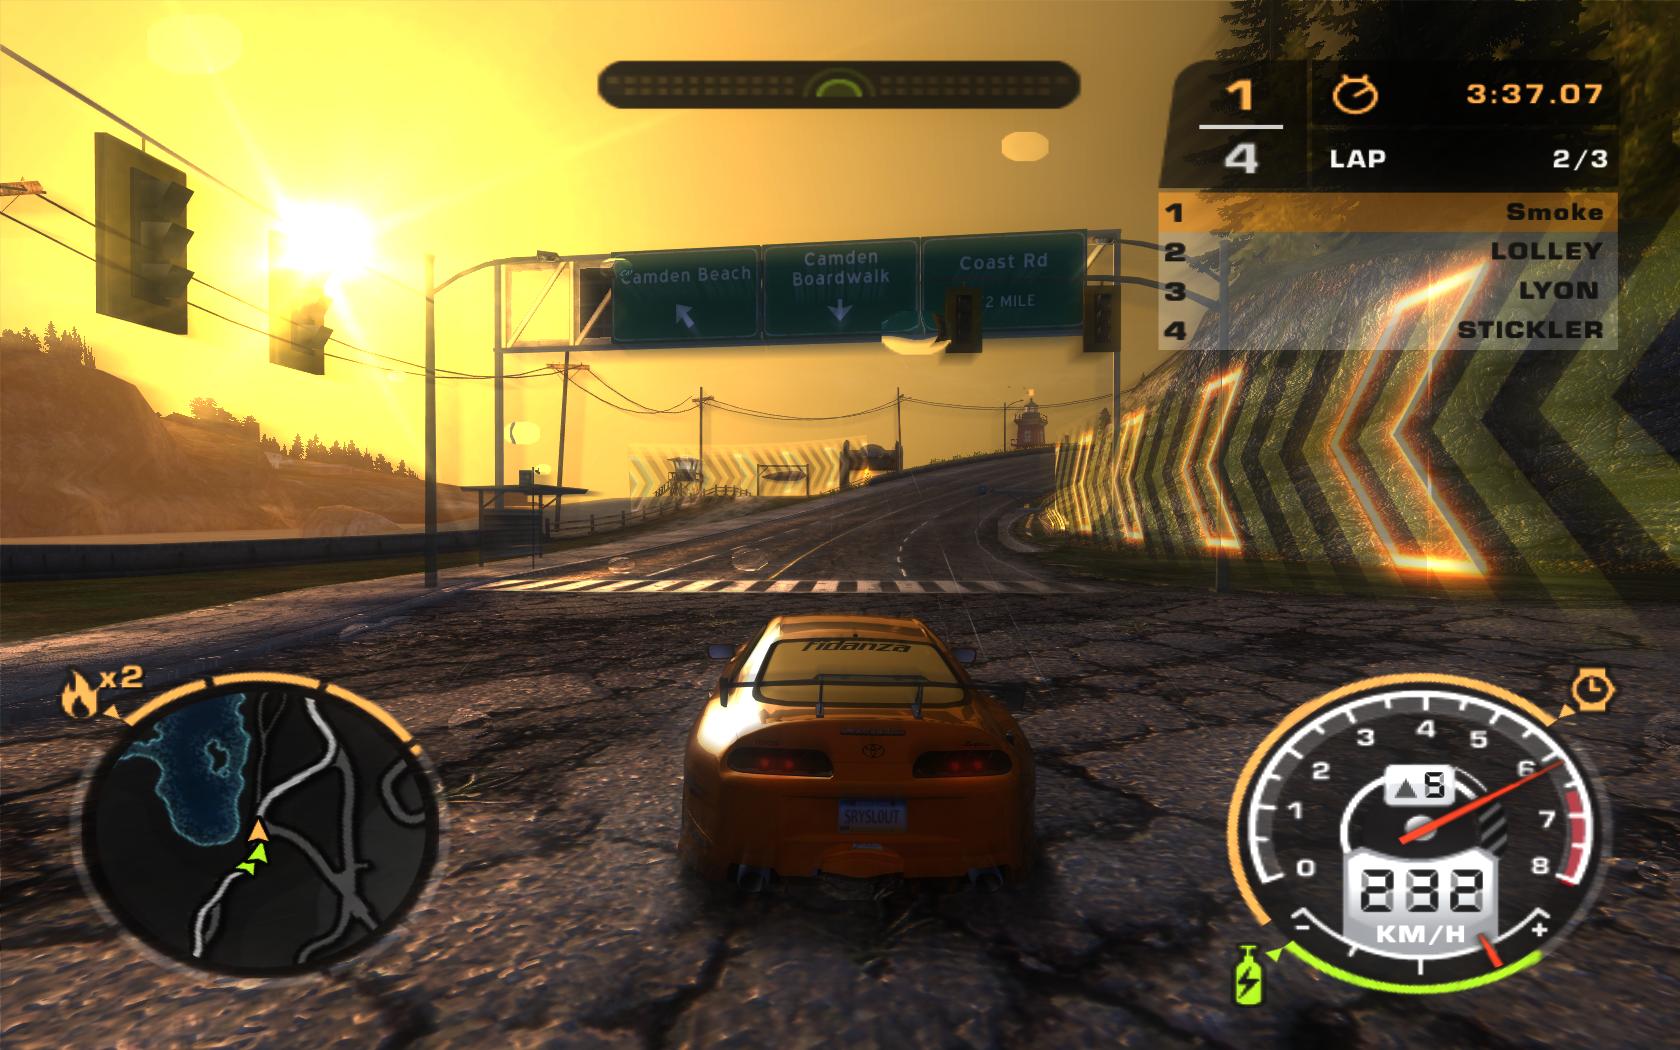 Nfs undercover save game 100 all cars download pc